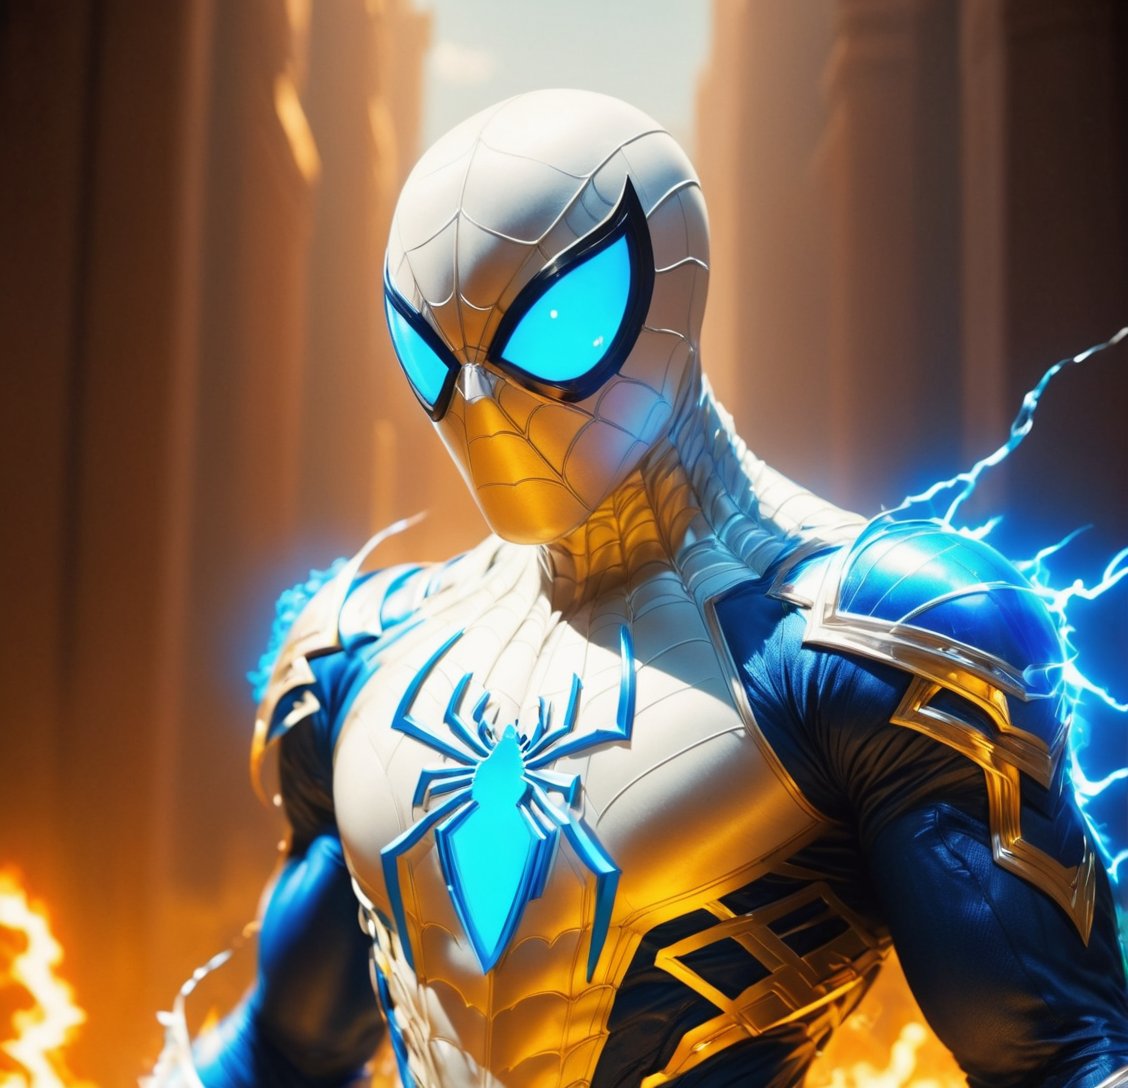 White SPIDERMAN, wears a WHITE suit, uses two blue fire swords, one in each hand, standing on a golden path, holds a blue fire sword in his right hand and a very shiny transparent blue sword in his left hand, muscular , muscular arms, best quality, teacher's workmanship, 8k, uhd, bright light, realistic style, has a letter H on his suit, hyper detailed muscles, DAY lighting, has a belt with letter H buckle,